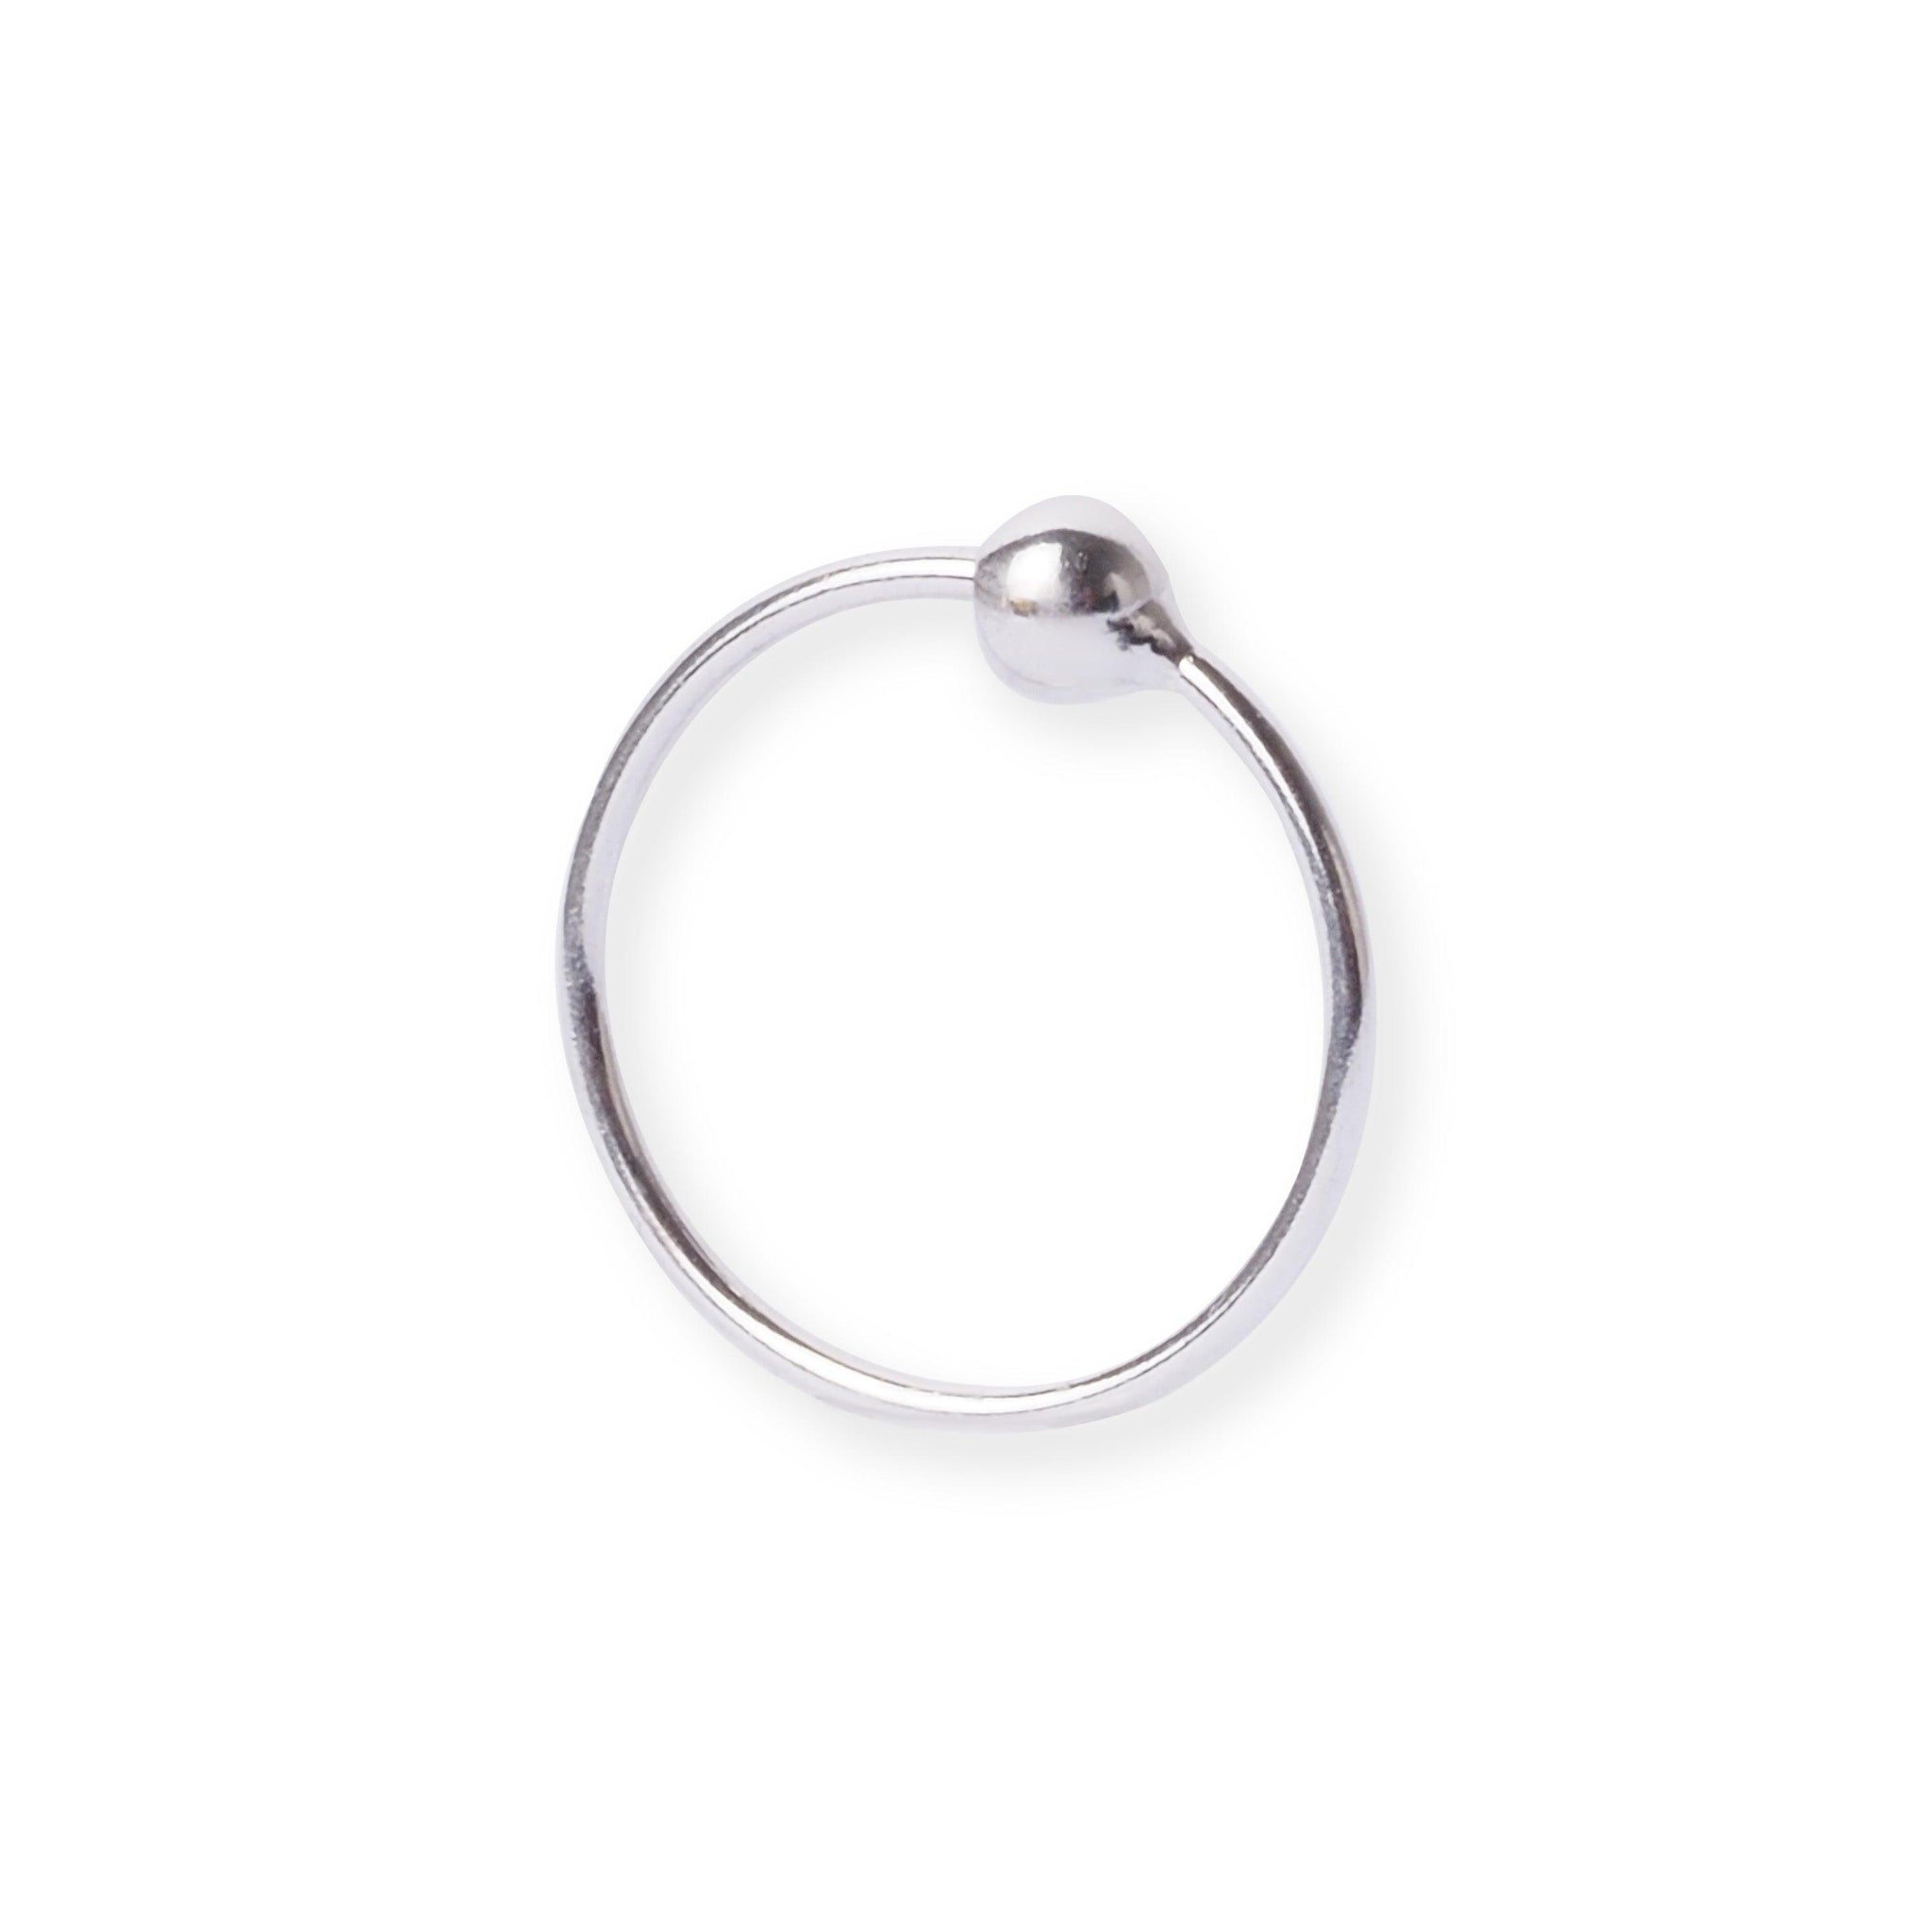 18ct Gold Rhodium Plated Nose Ring with Plain Finish and Ball Closure NR-7578R